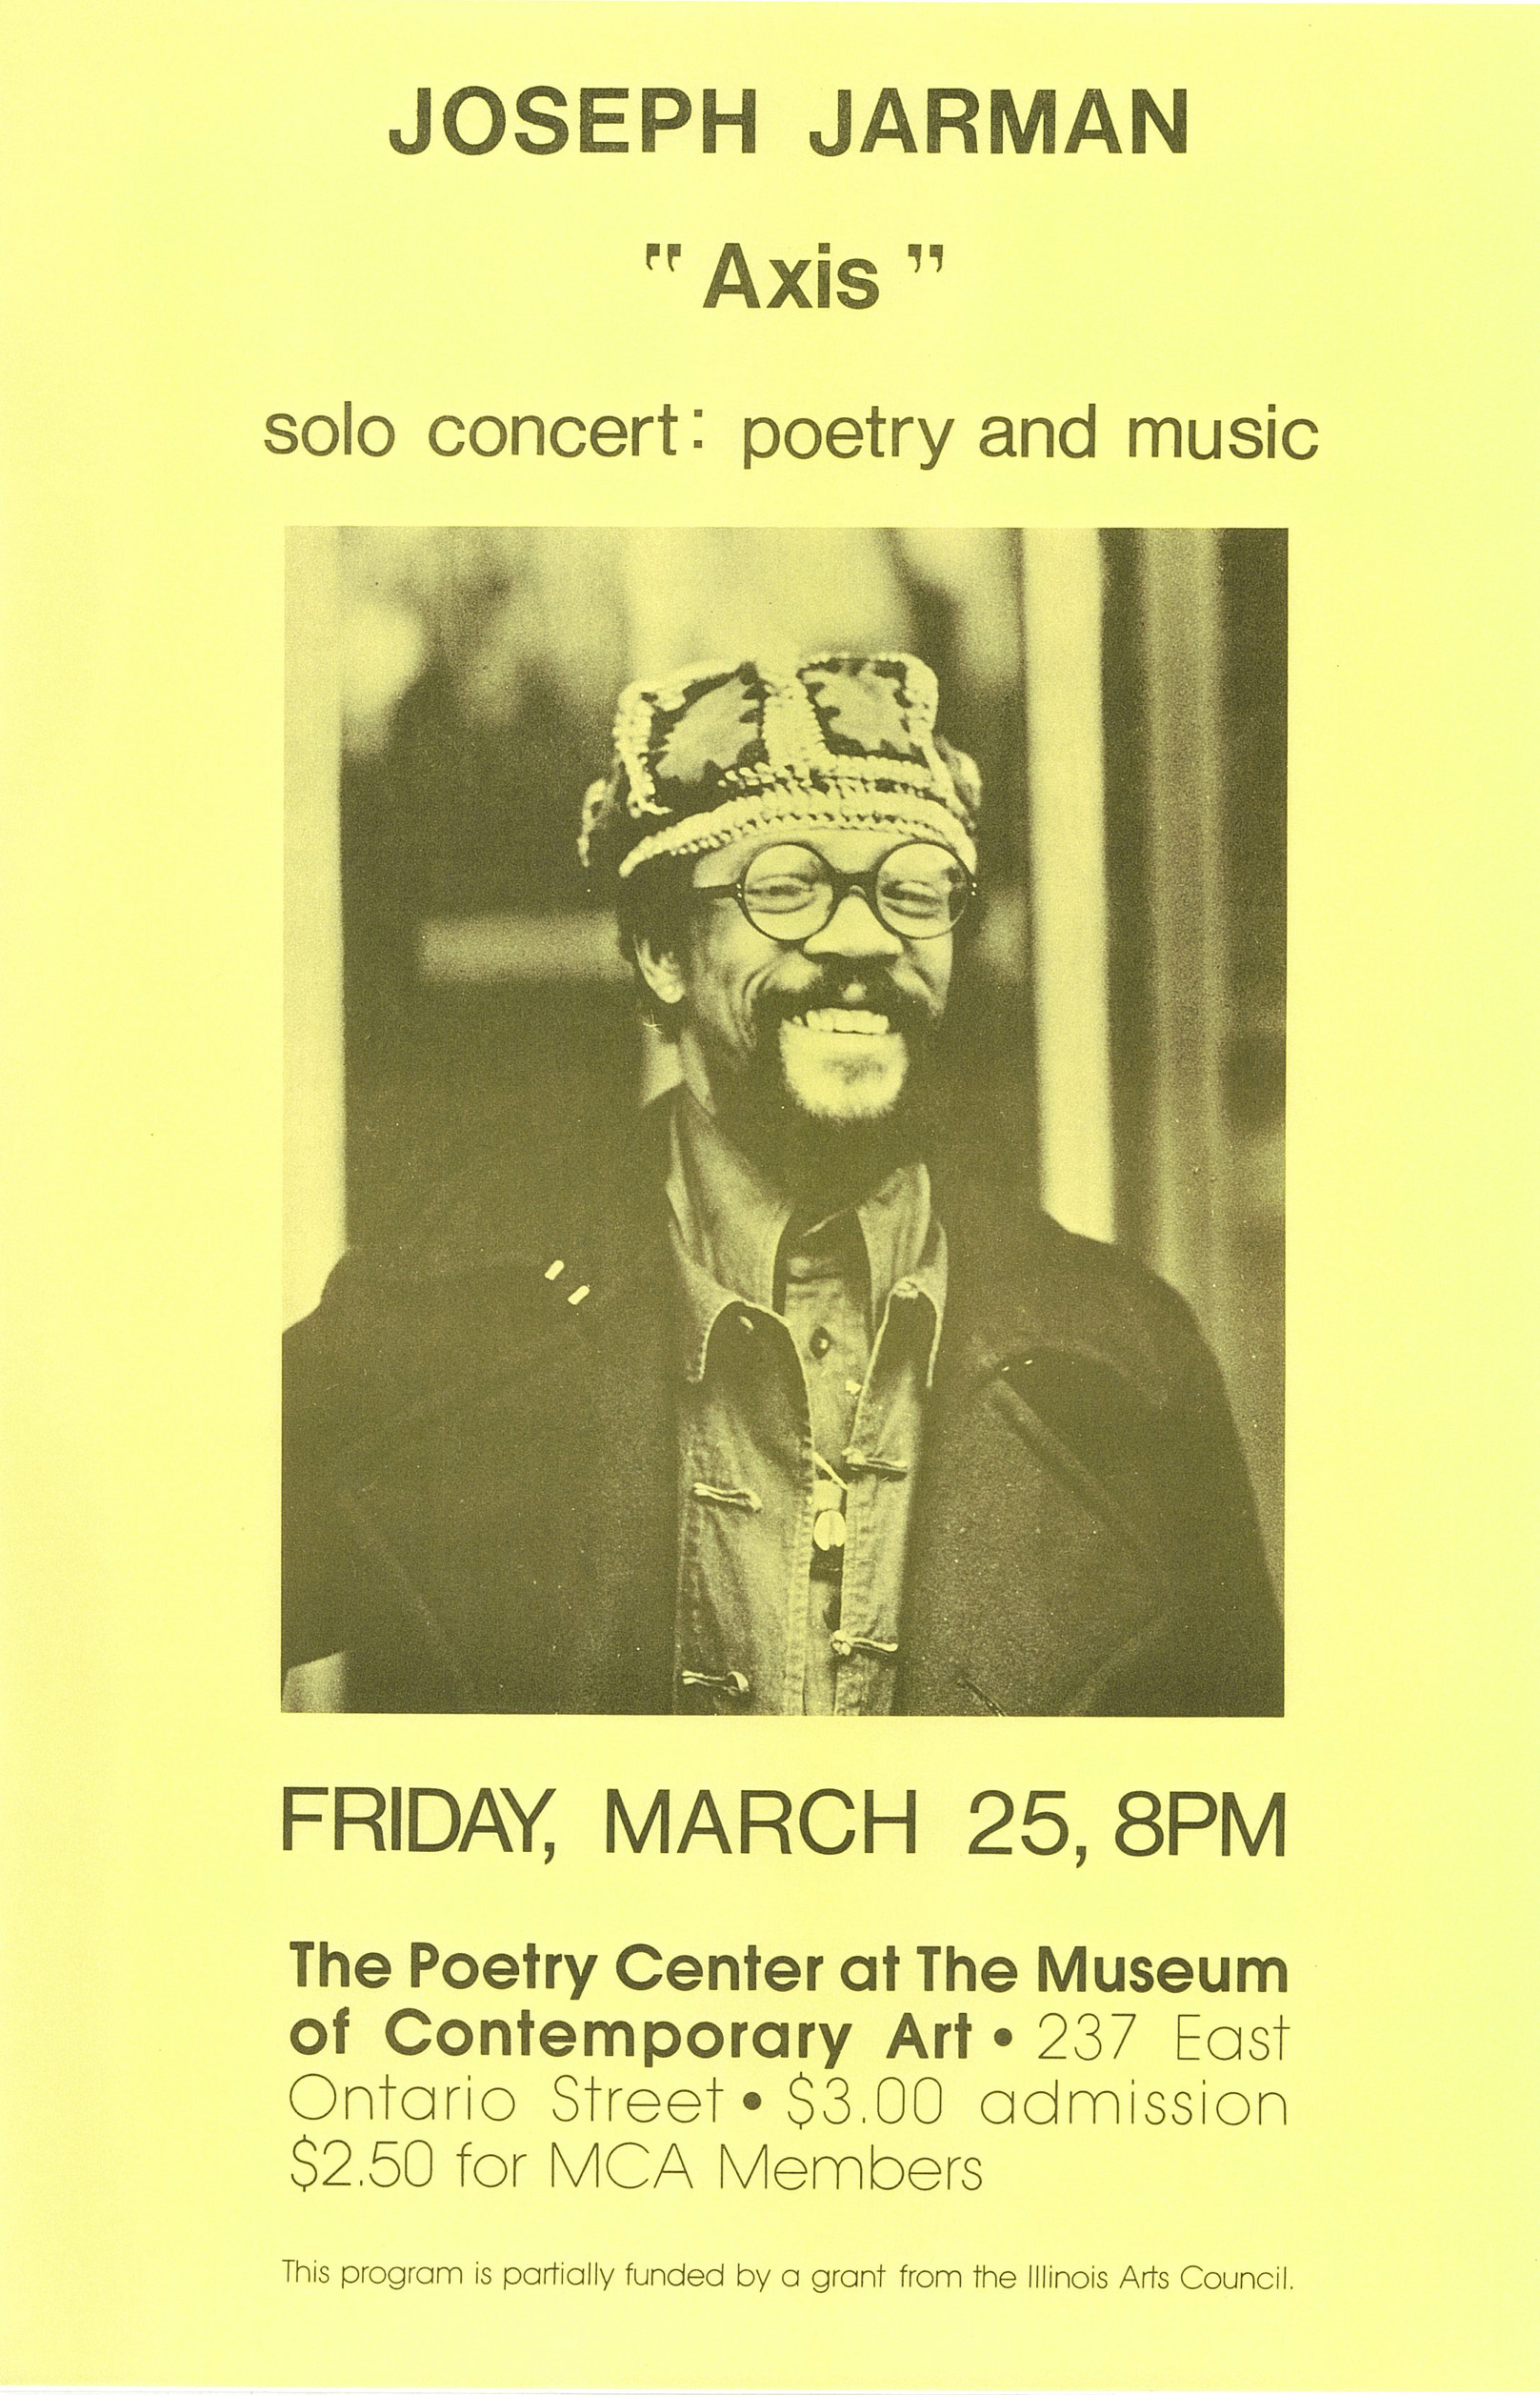 Vintage poster of of Joseph Jarman's solo concert for the Poetry Center of Chicago.